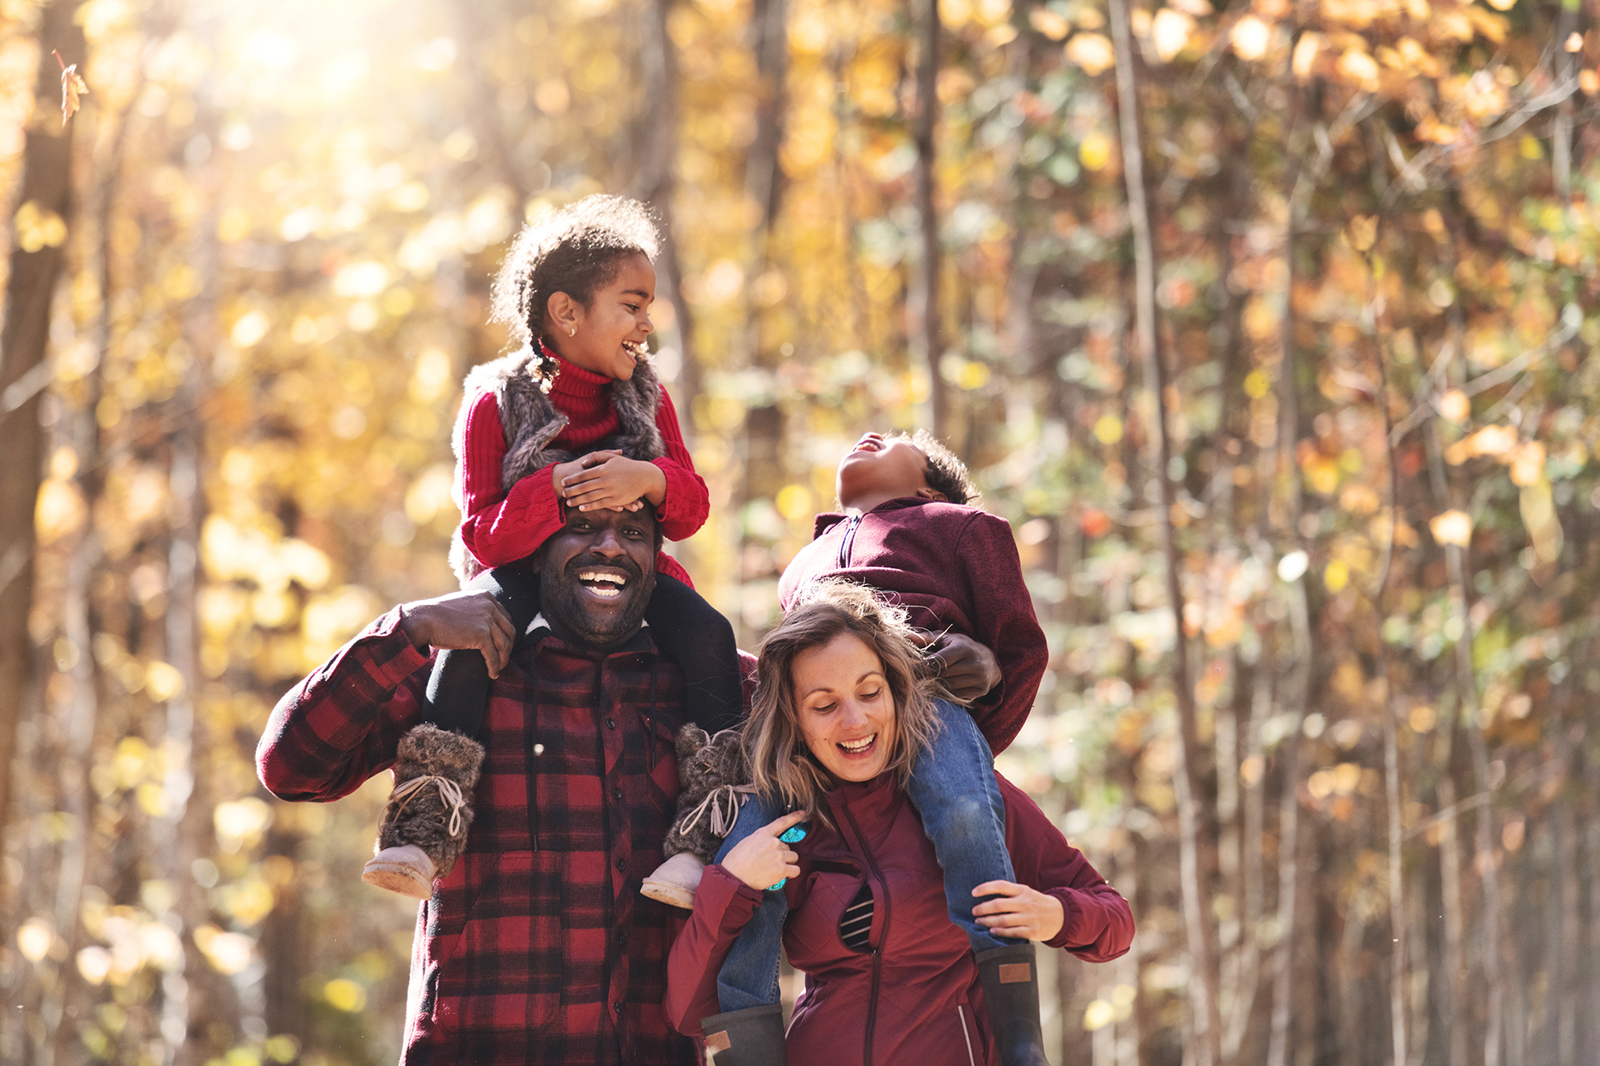 <p>  Fall break is only a few weeks away, which means that many families are looking for the best places to visit in fall. Awesome <a href="https://www.lovetoknow.com/life/lifestyle/best-places-see-fall-foliage-across-us" rel="slideshow" title="11 of the Best Places to See Fall Foliage Across the U.S. ">autumn colors</a> are a must, and of course, you need family-friendly activities for an array of ages. </p> <p>  No need to fret if you didn't plan in advance! We've mapped out some of the best fall family vacations that are affordable and fun for everyone. </p>